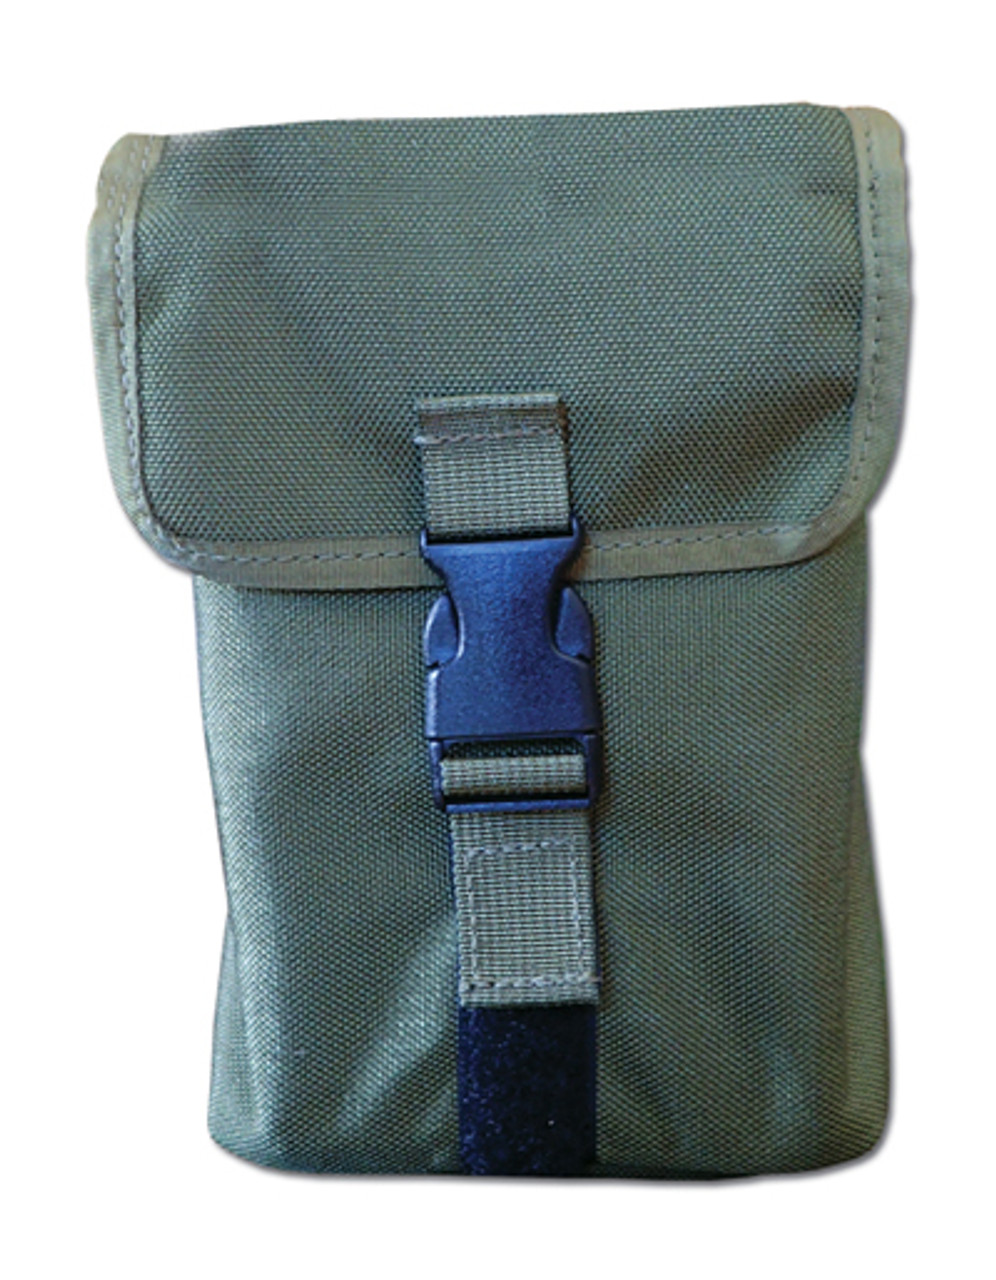 ESEE Tin Pouch MOLLE-compatible, OD-Green  Advantageously shopping at